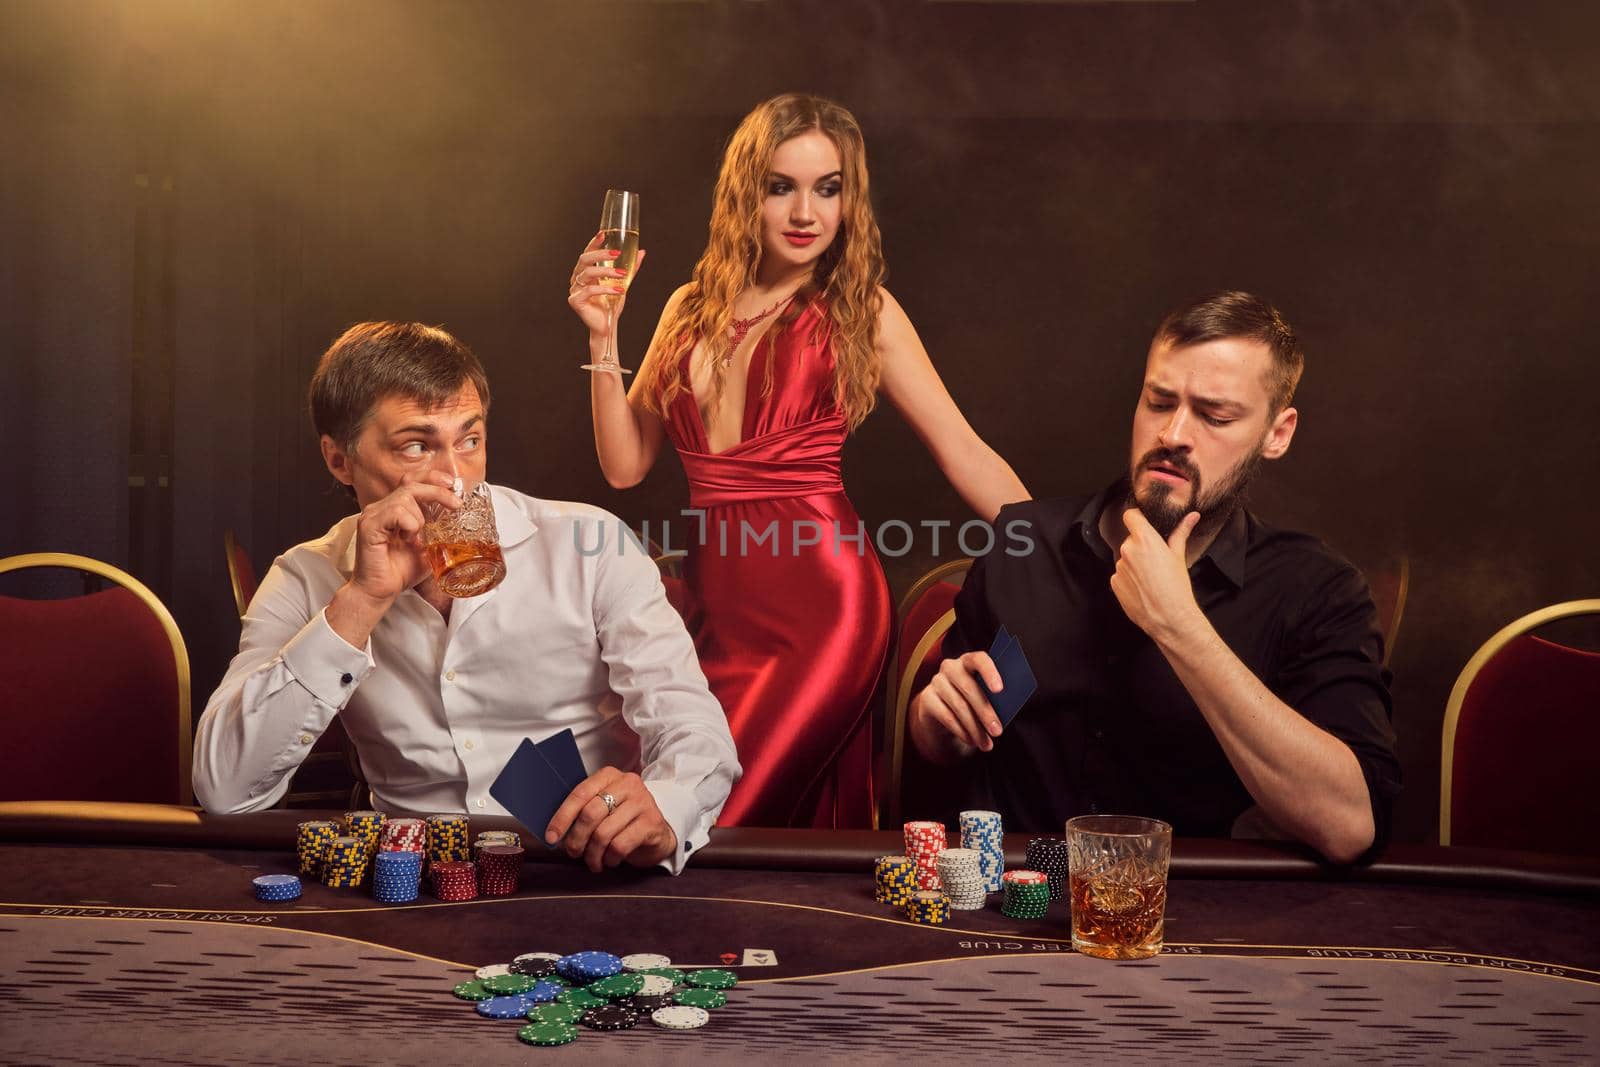 Two good-looking friends and sexy woman are playing poker at casino. They are making bets waiting for a big win while posing at the table against a yellow backlight on smoke background. Cards, chips, money, gambling, entertainment concept.